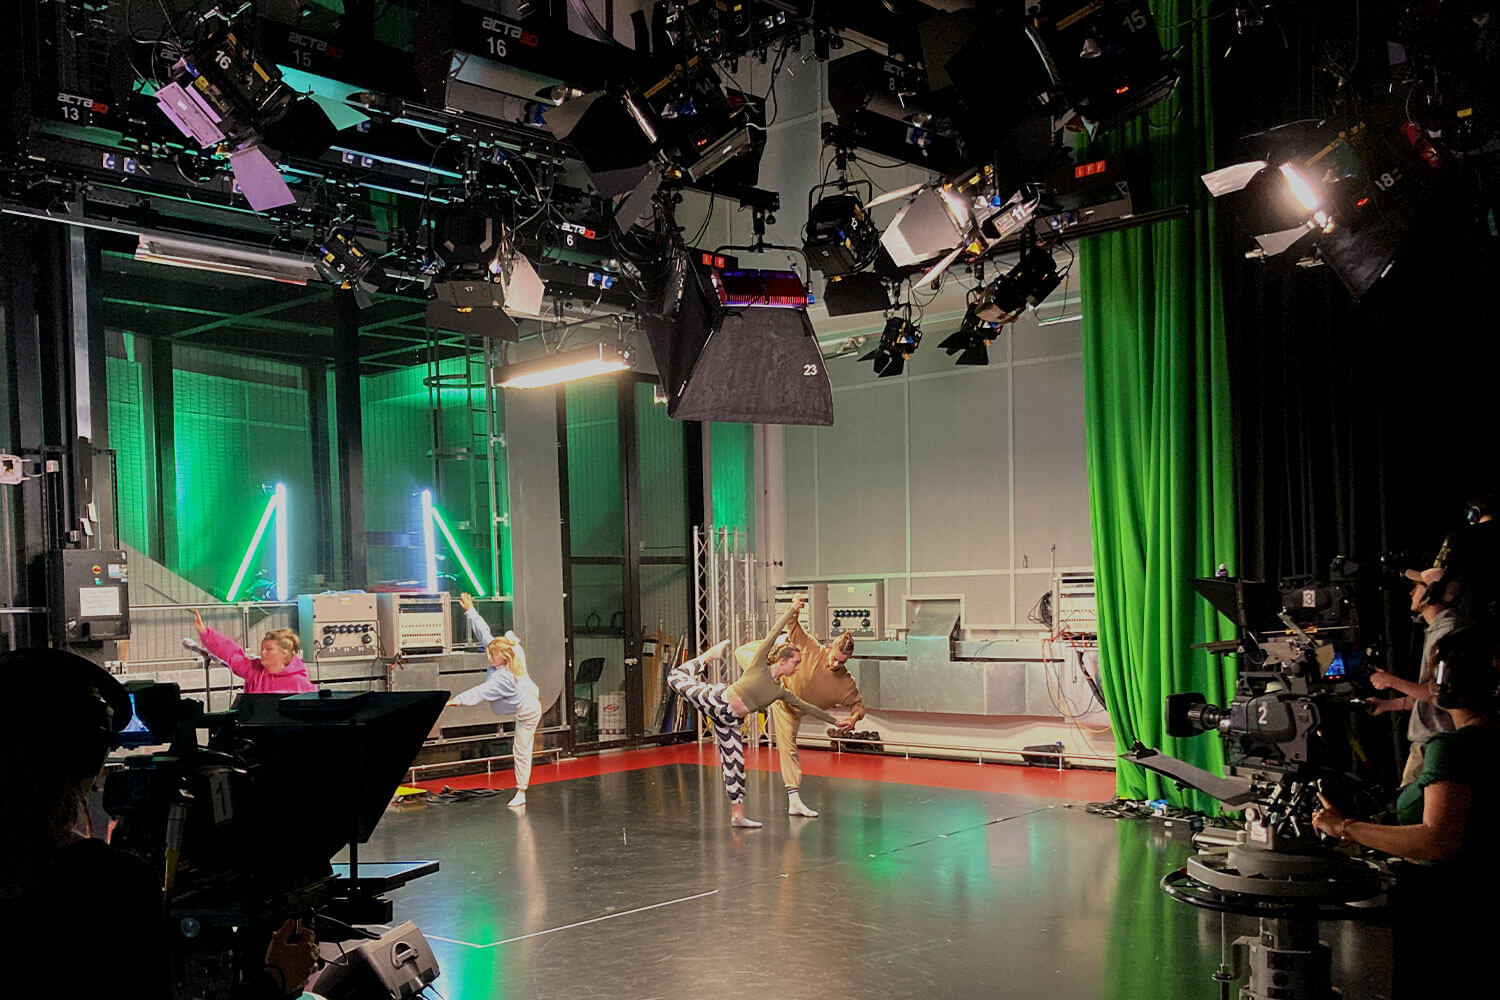 Students in a television studio filming dancers.